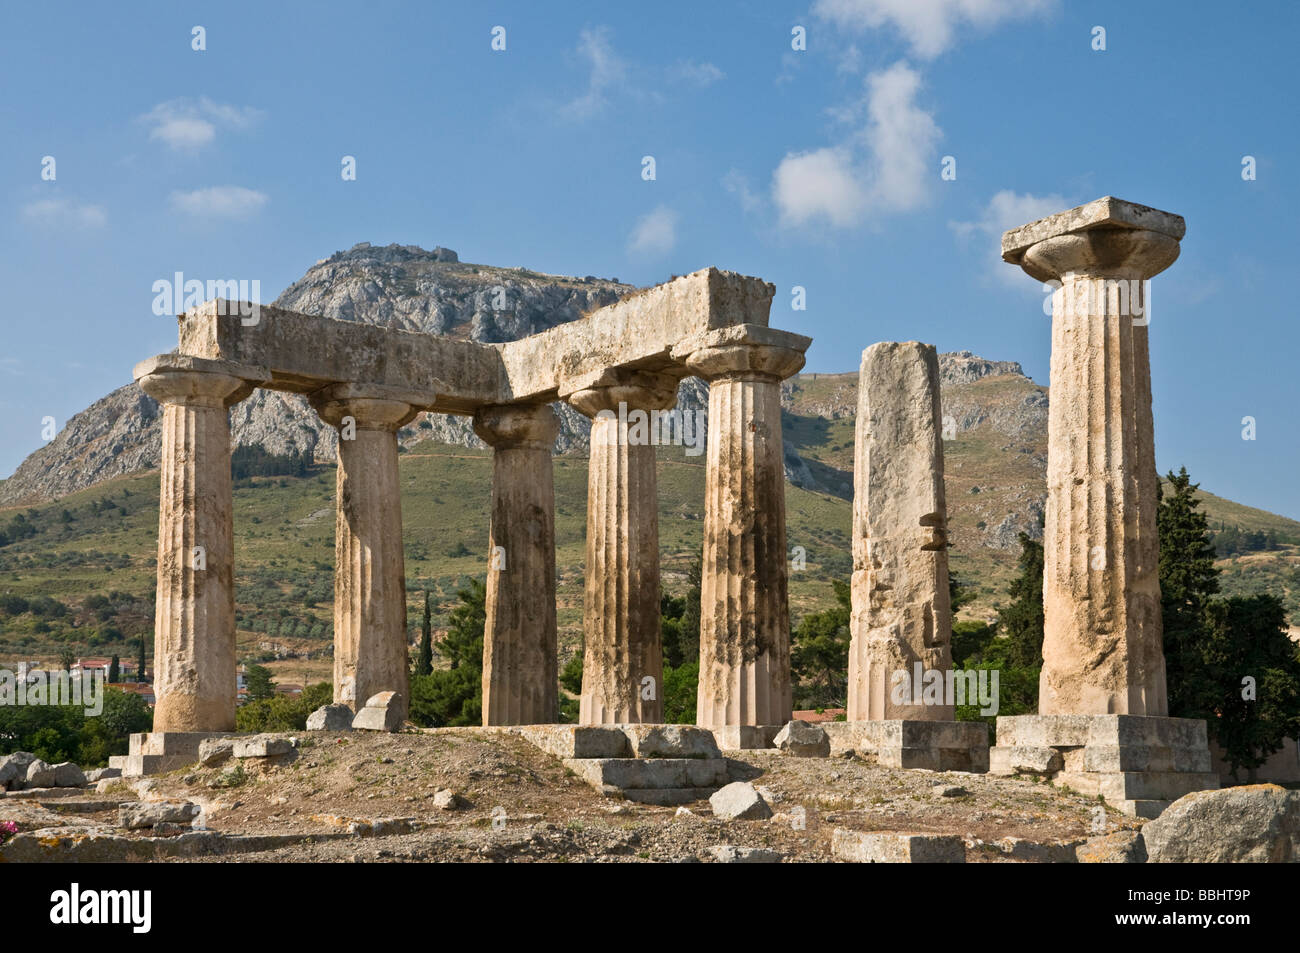 Looking across the 5th cen BC site of the Temple of Apollo at Ancient Corinth, Peloponnese, Greece Stock Photo